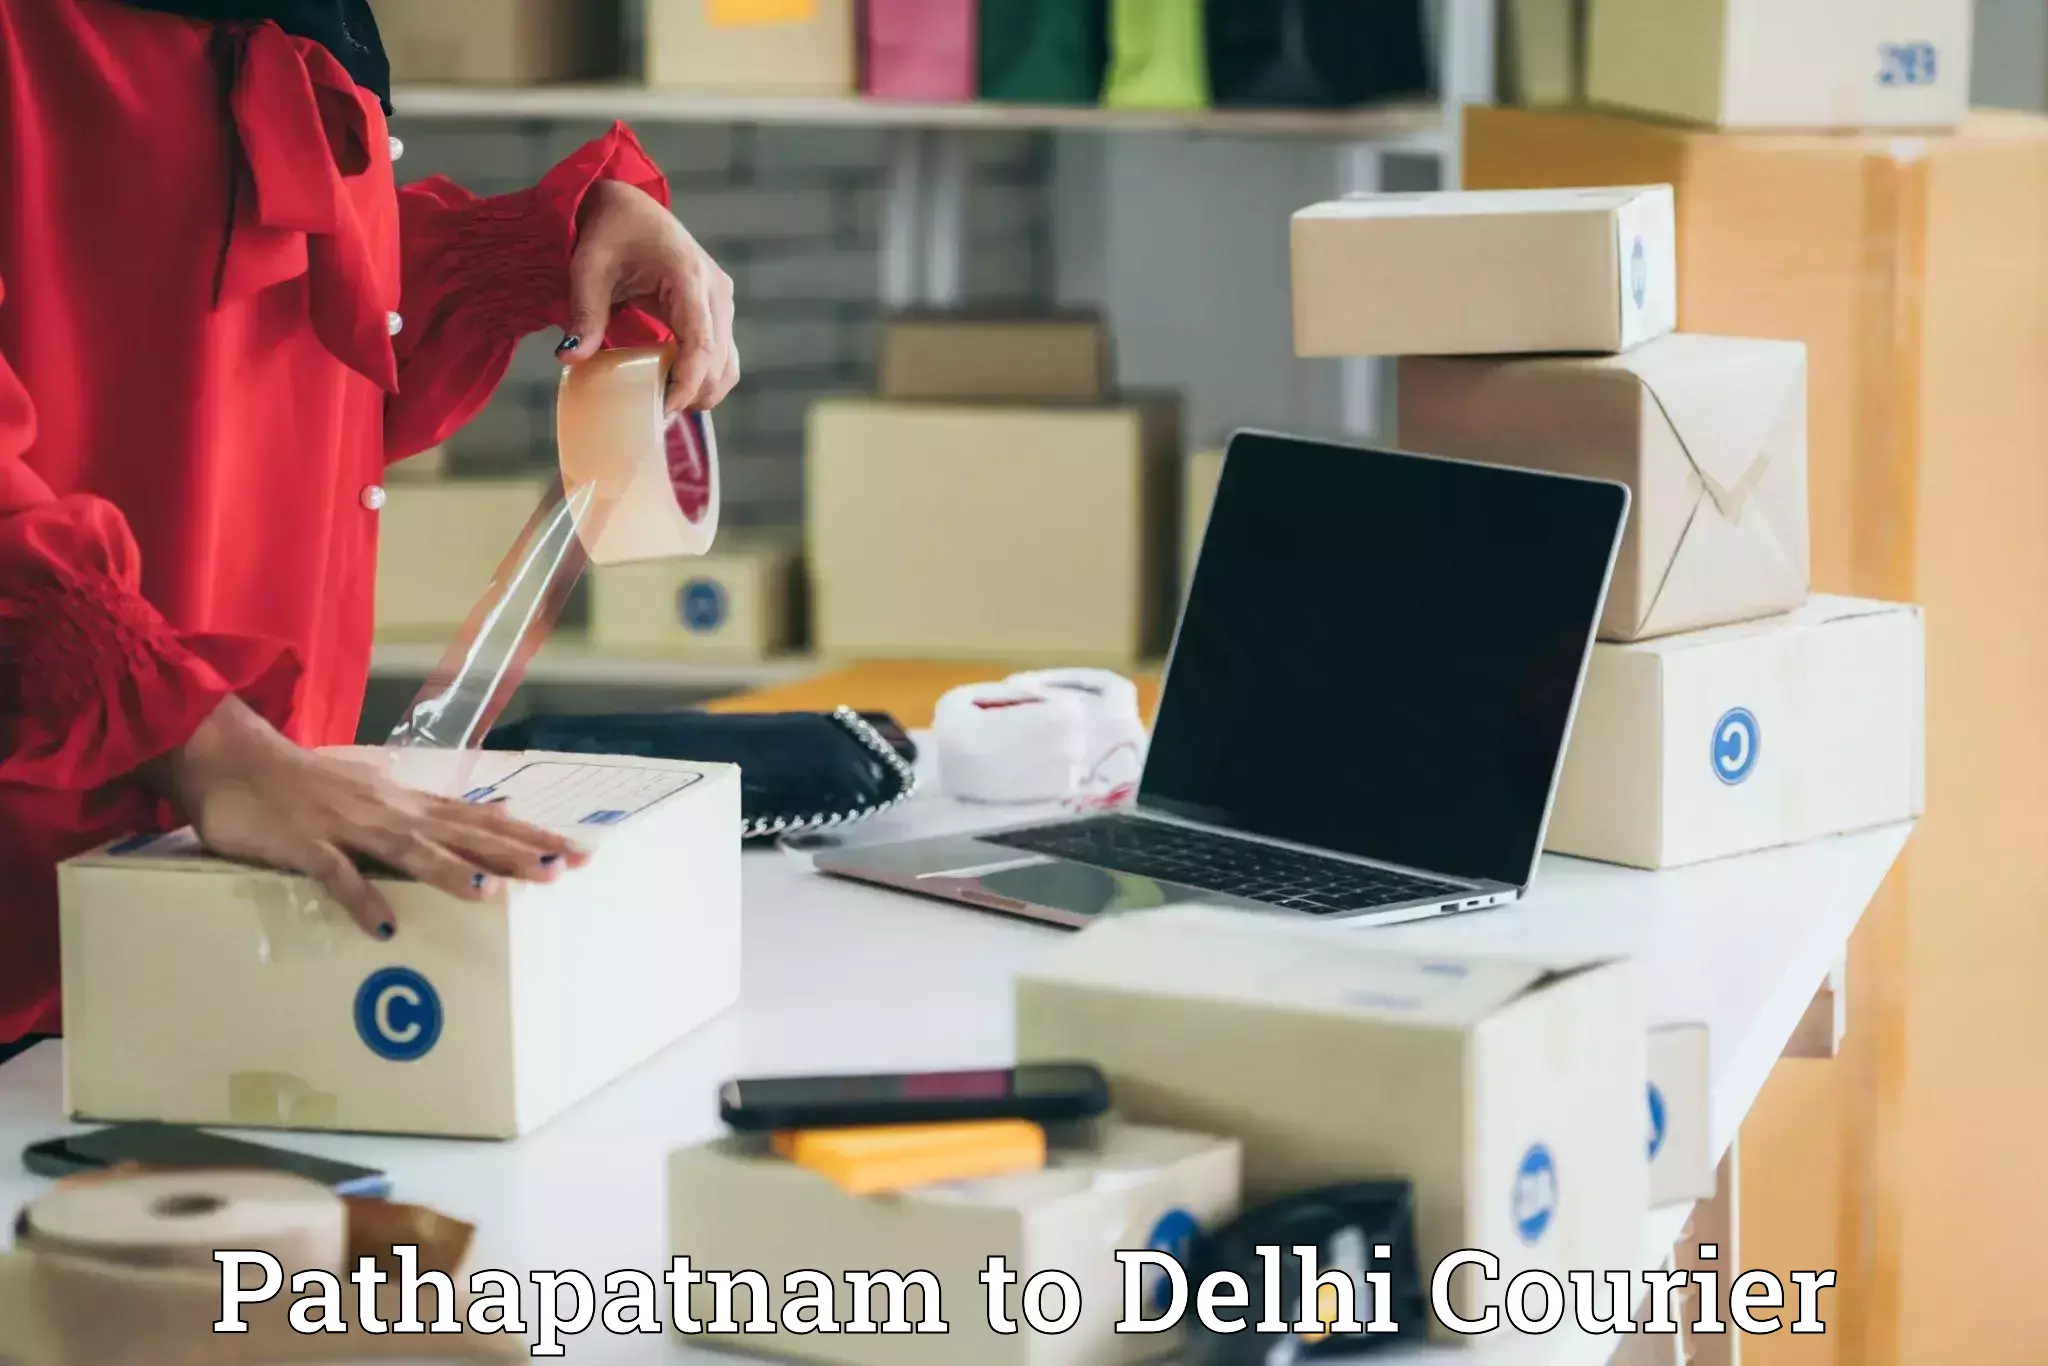 Business shipping needs Pathapatnam to Delhi Technological University DTU